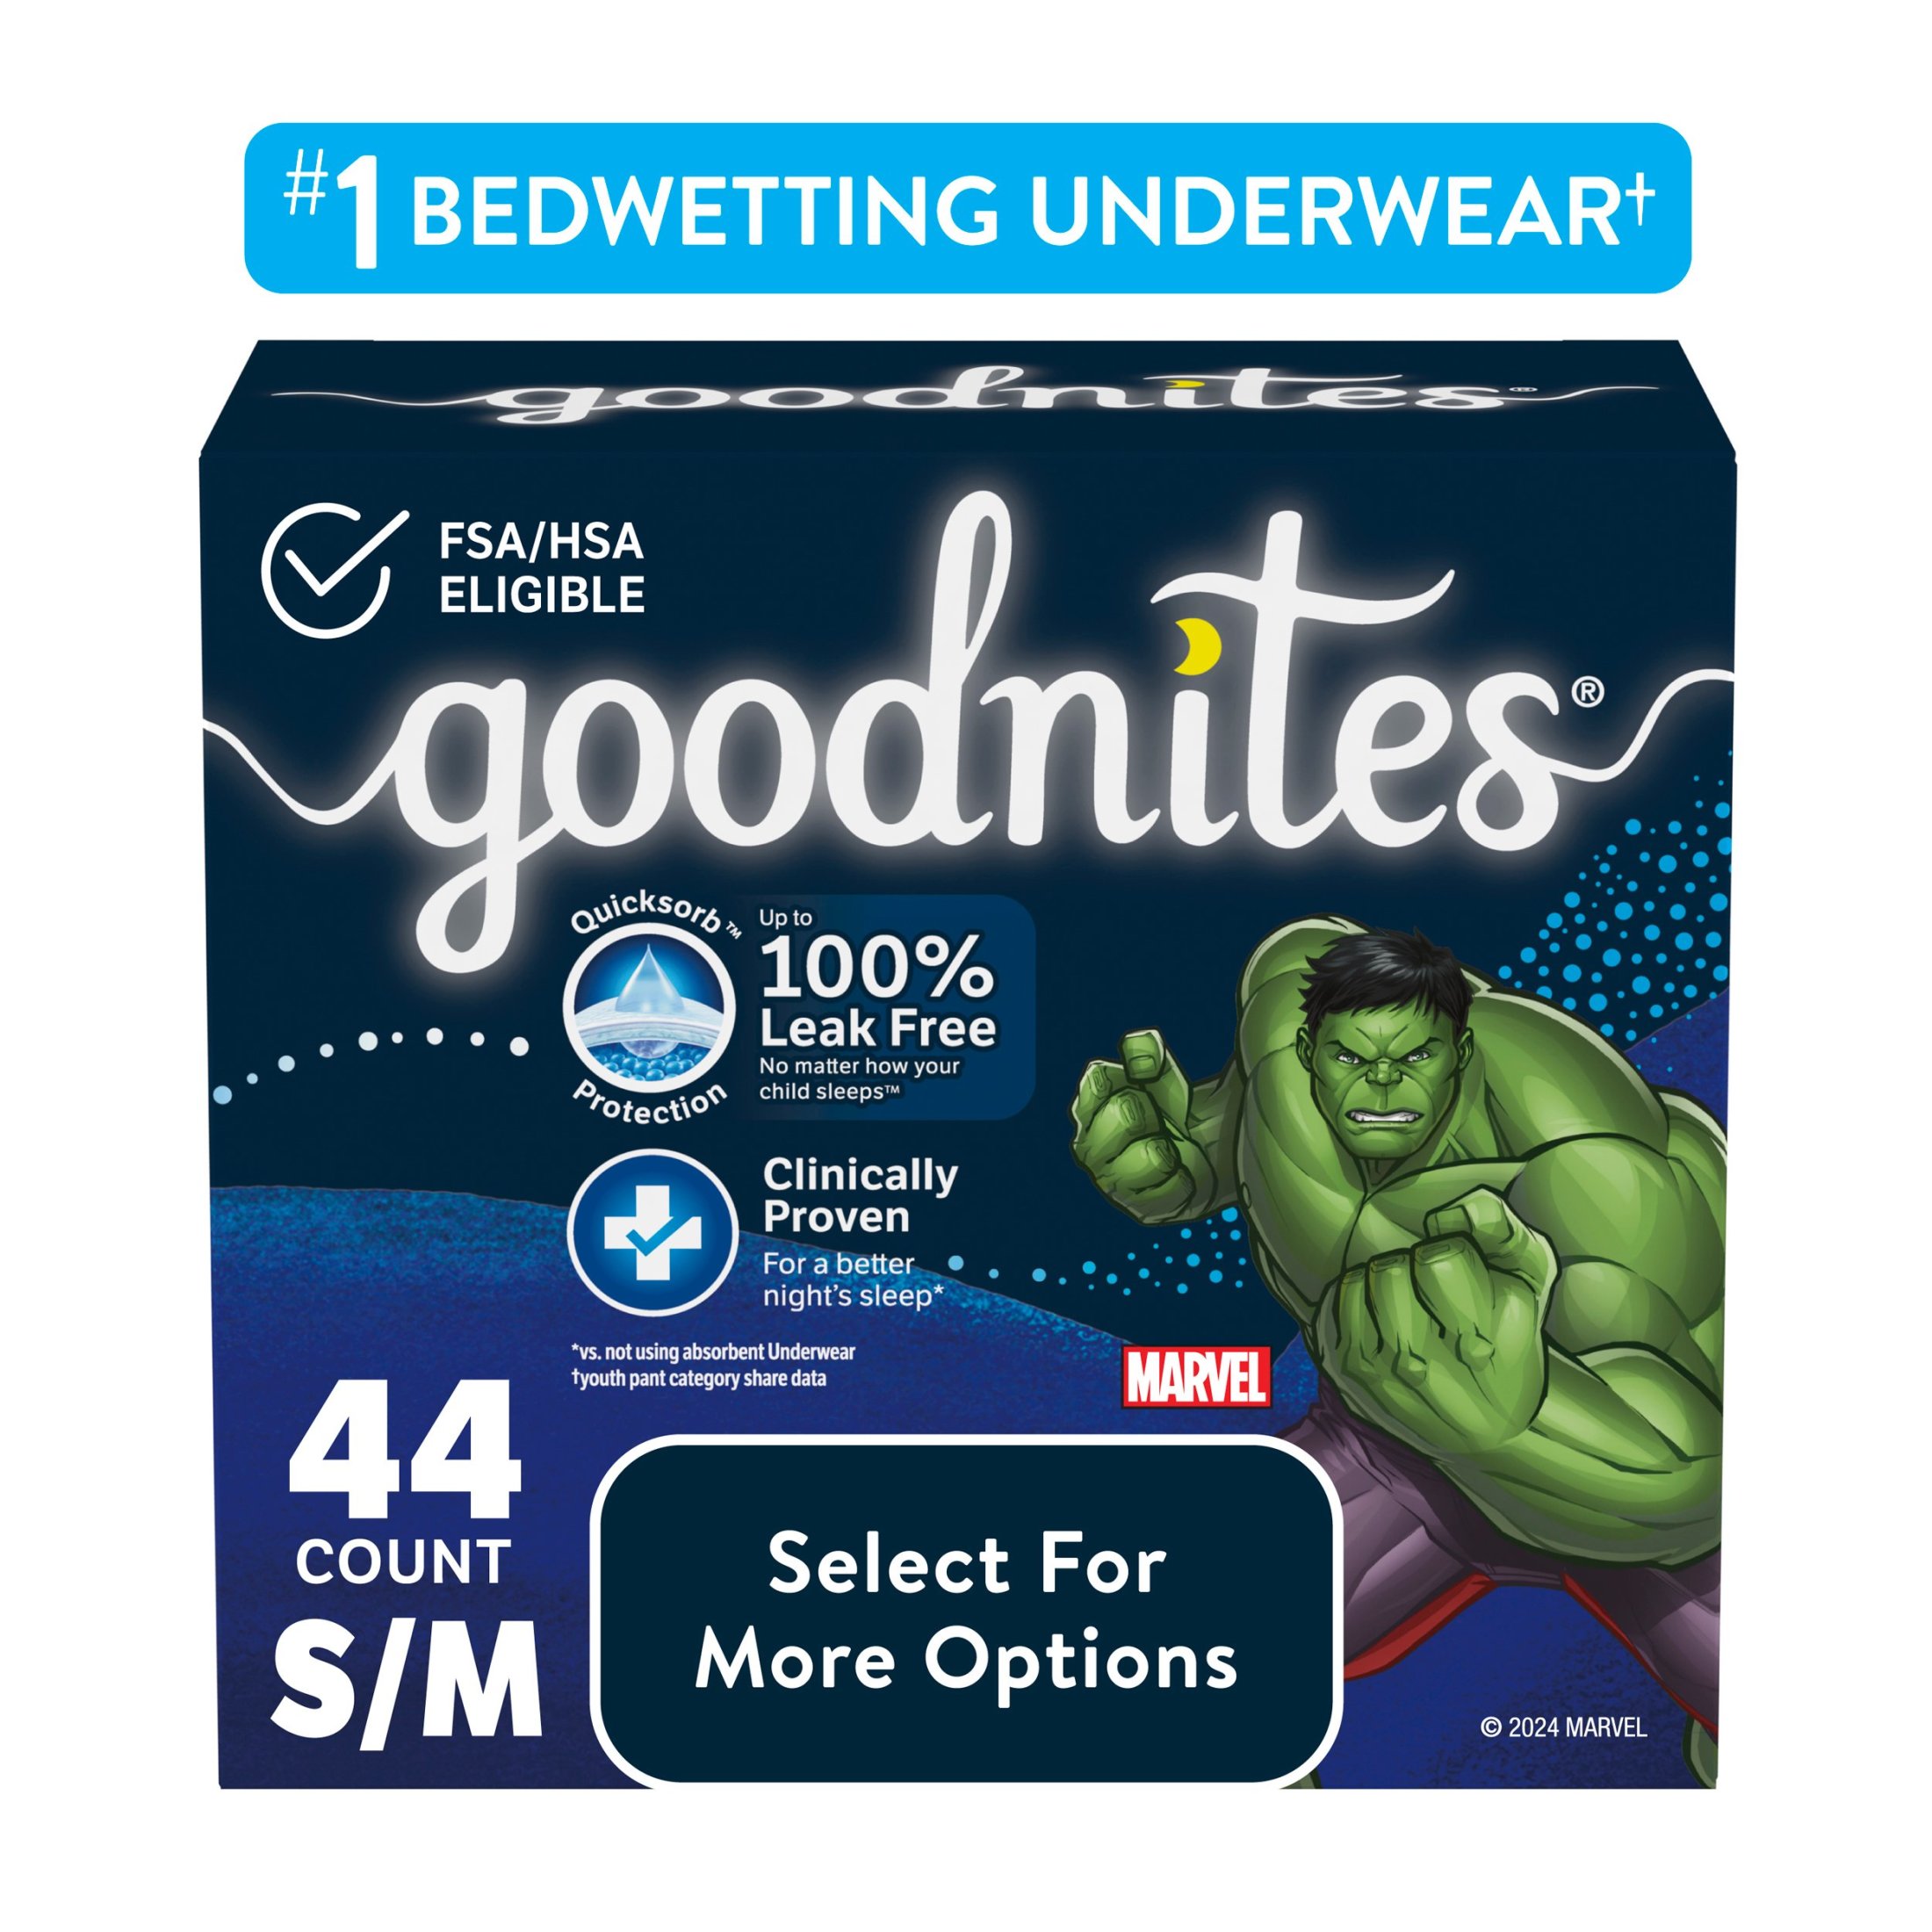 Goodnites Nighttime Bedwetting Underwear for Boys, S/M, 44 Ct (Select for More Options) - image 1 of 11